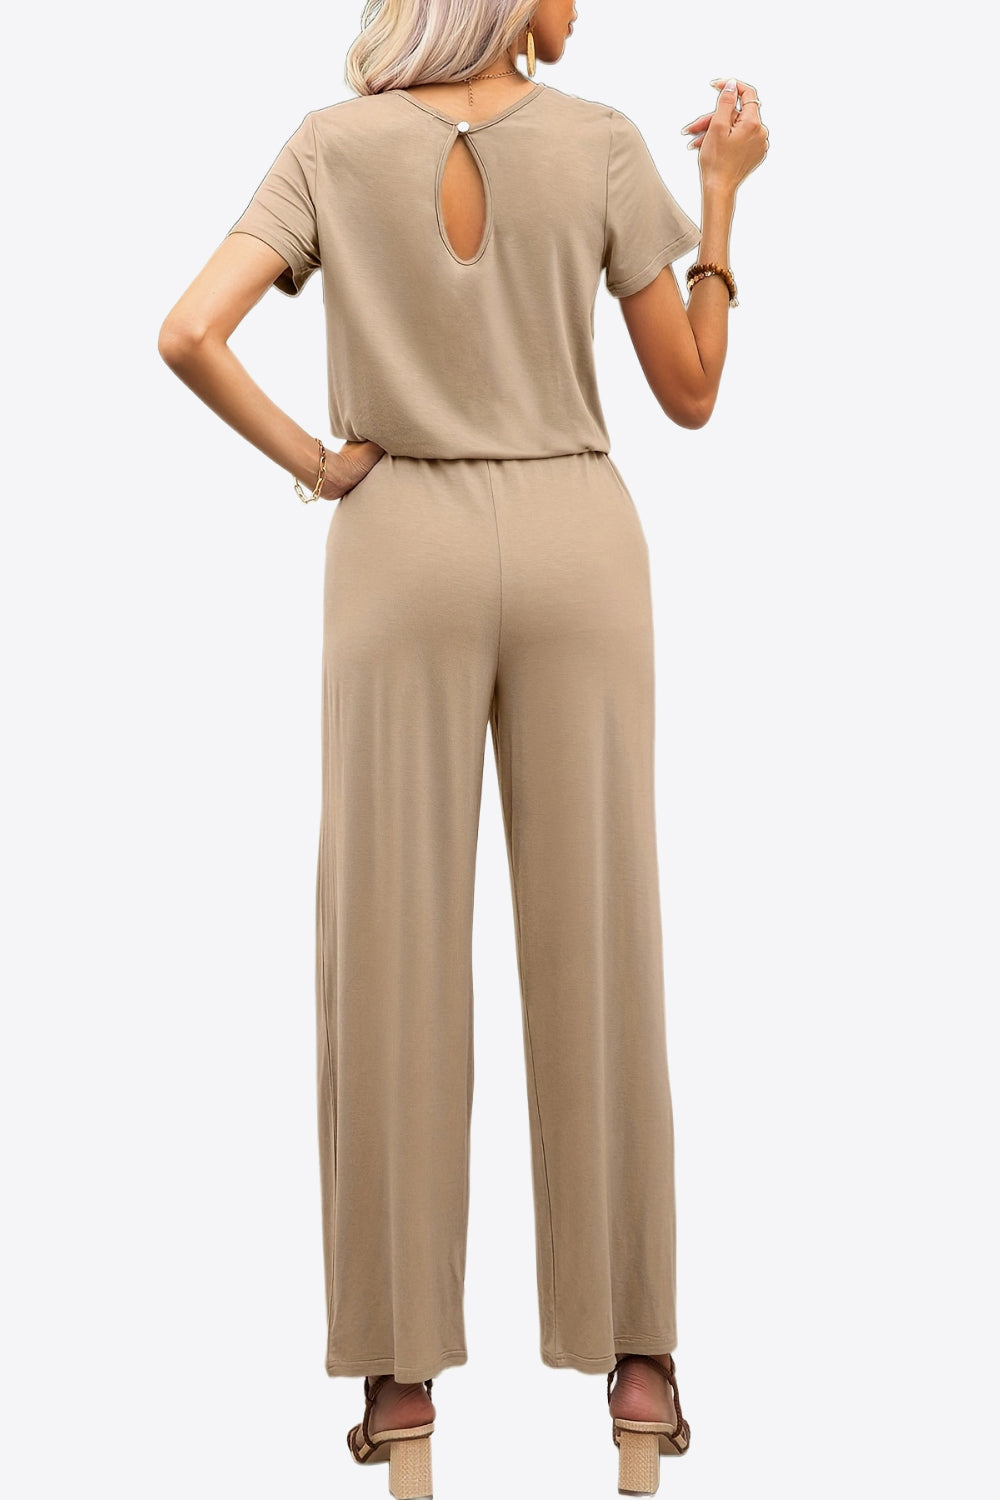 Round Neck Short Sleeve Jumpsuit with Pockets